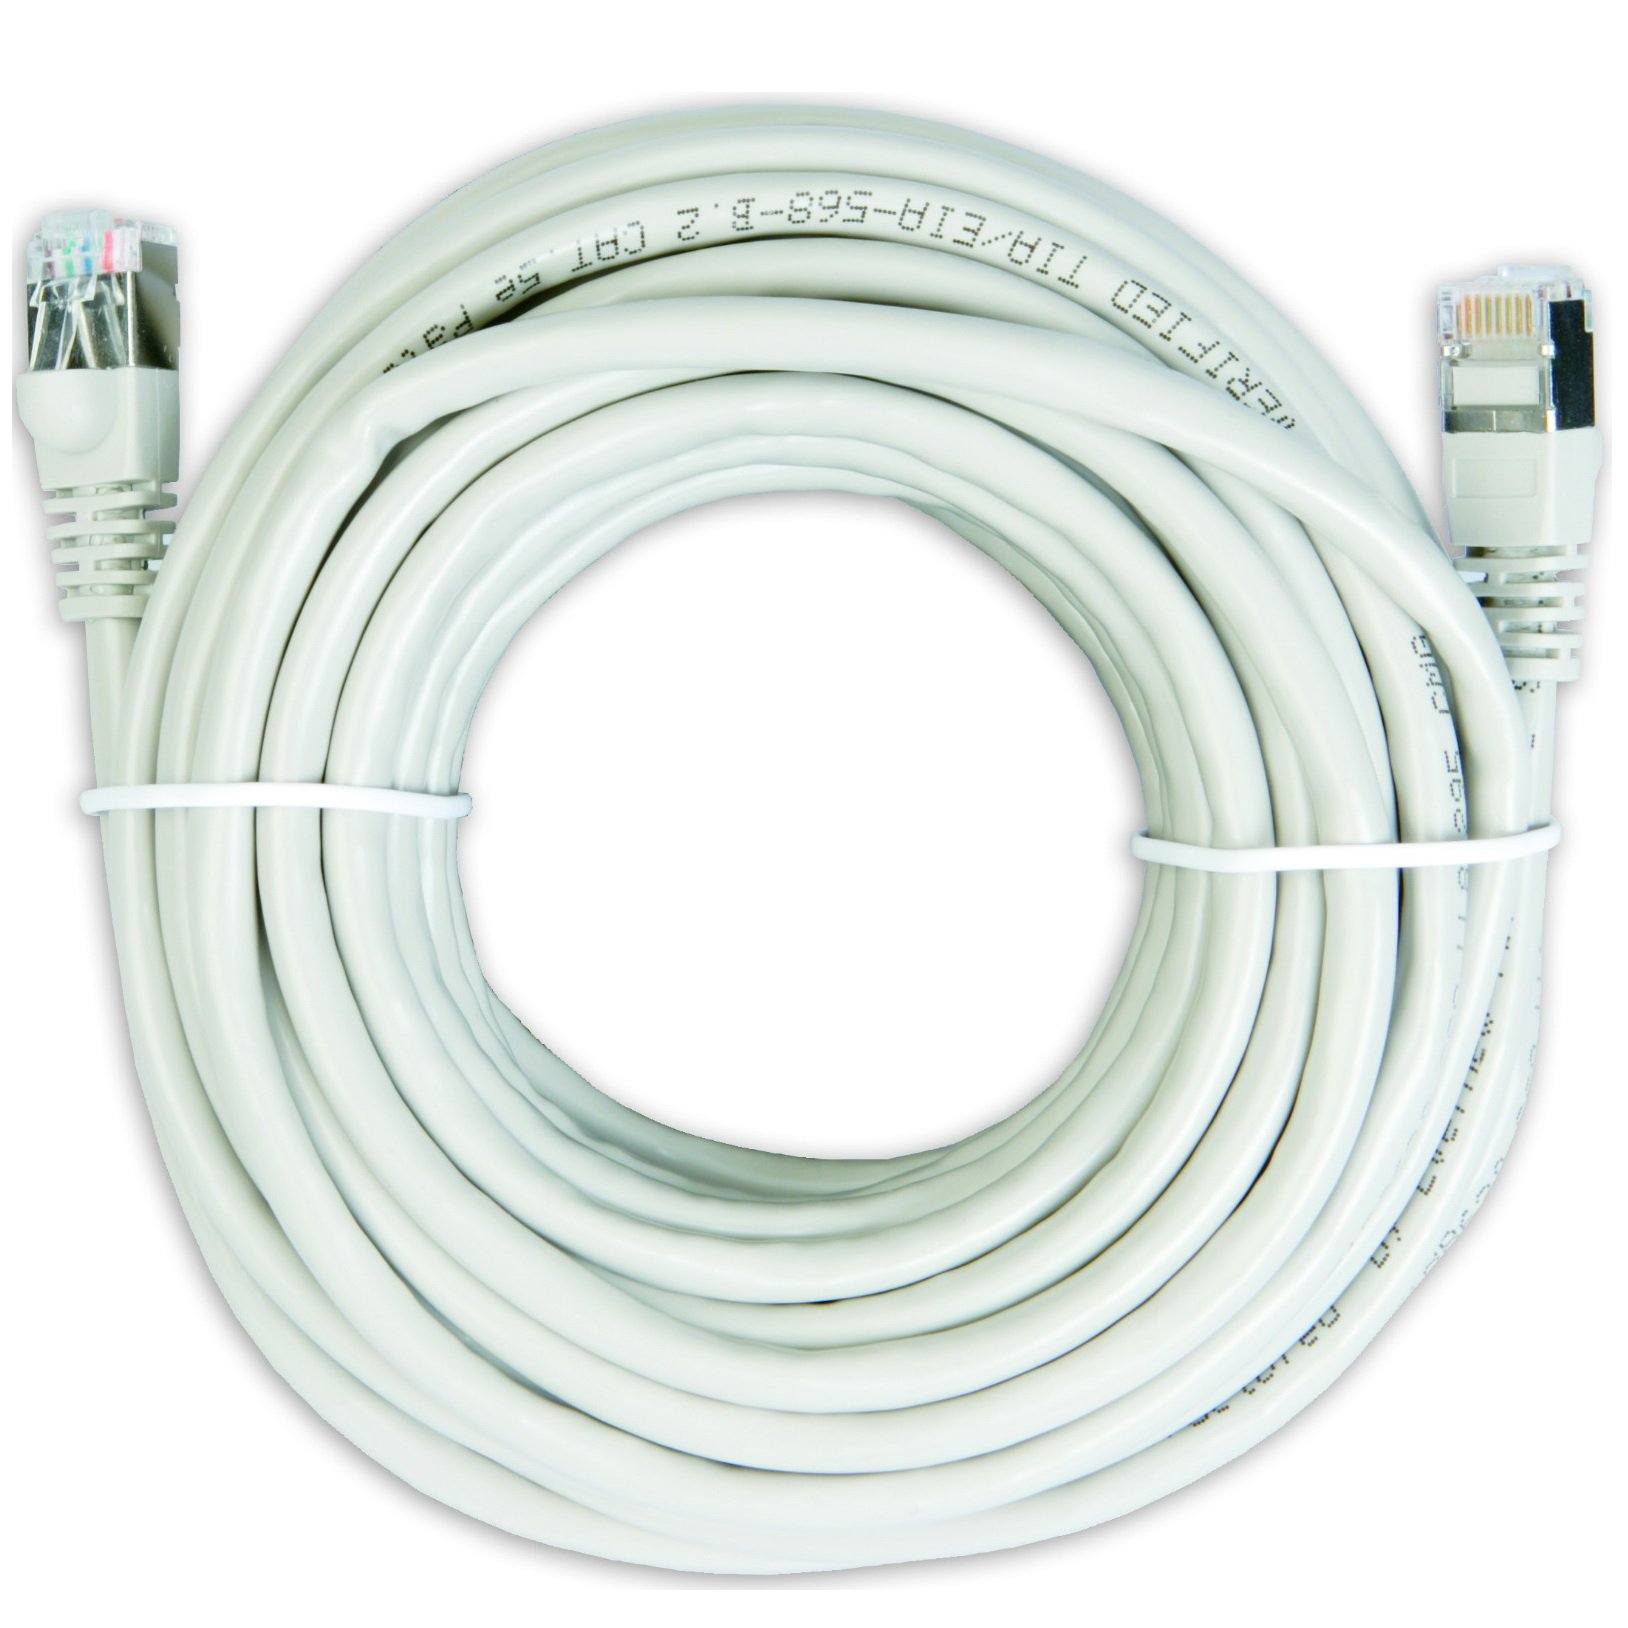 25' RJ45 Cable